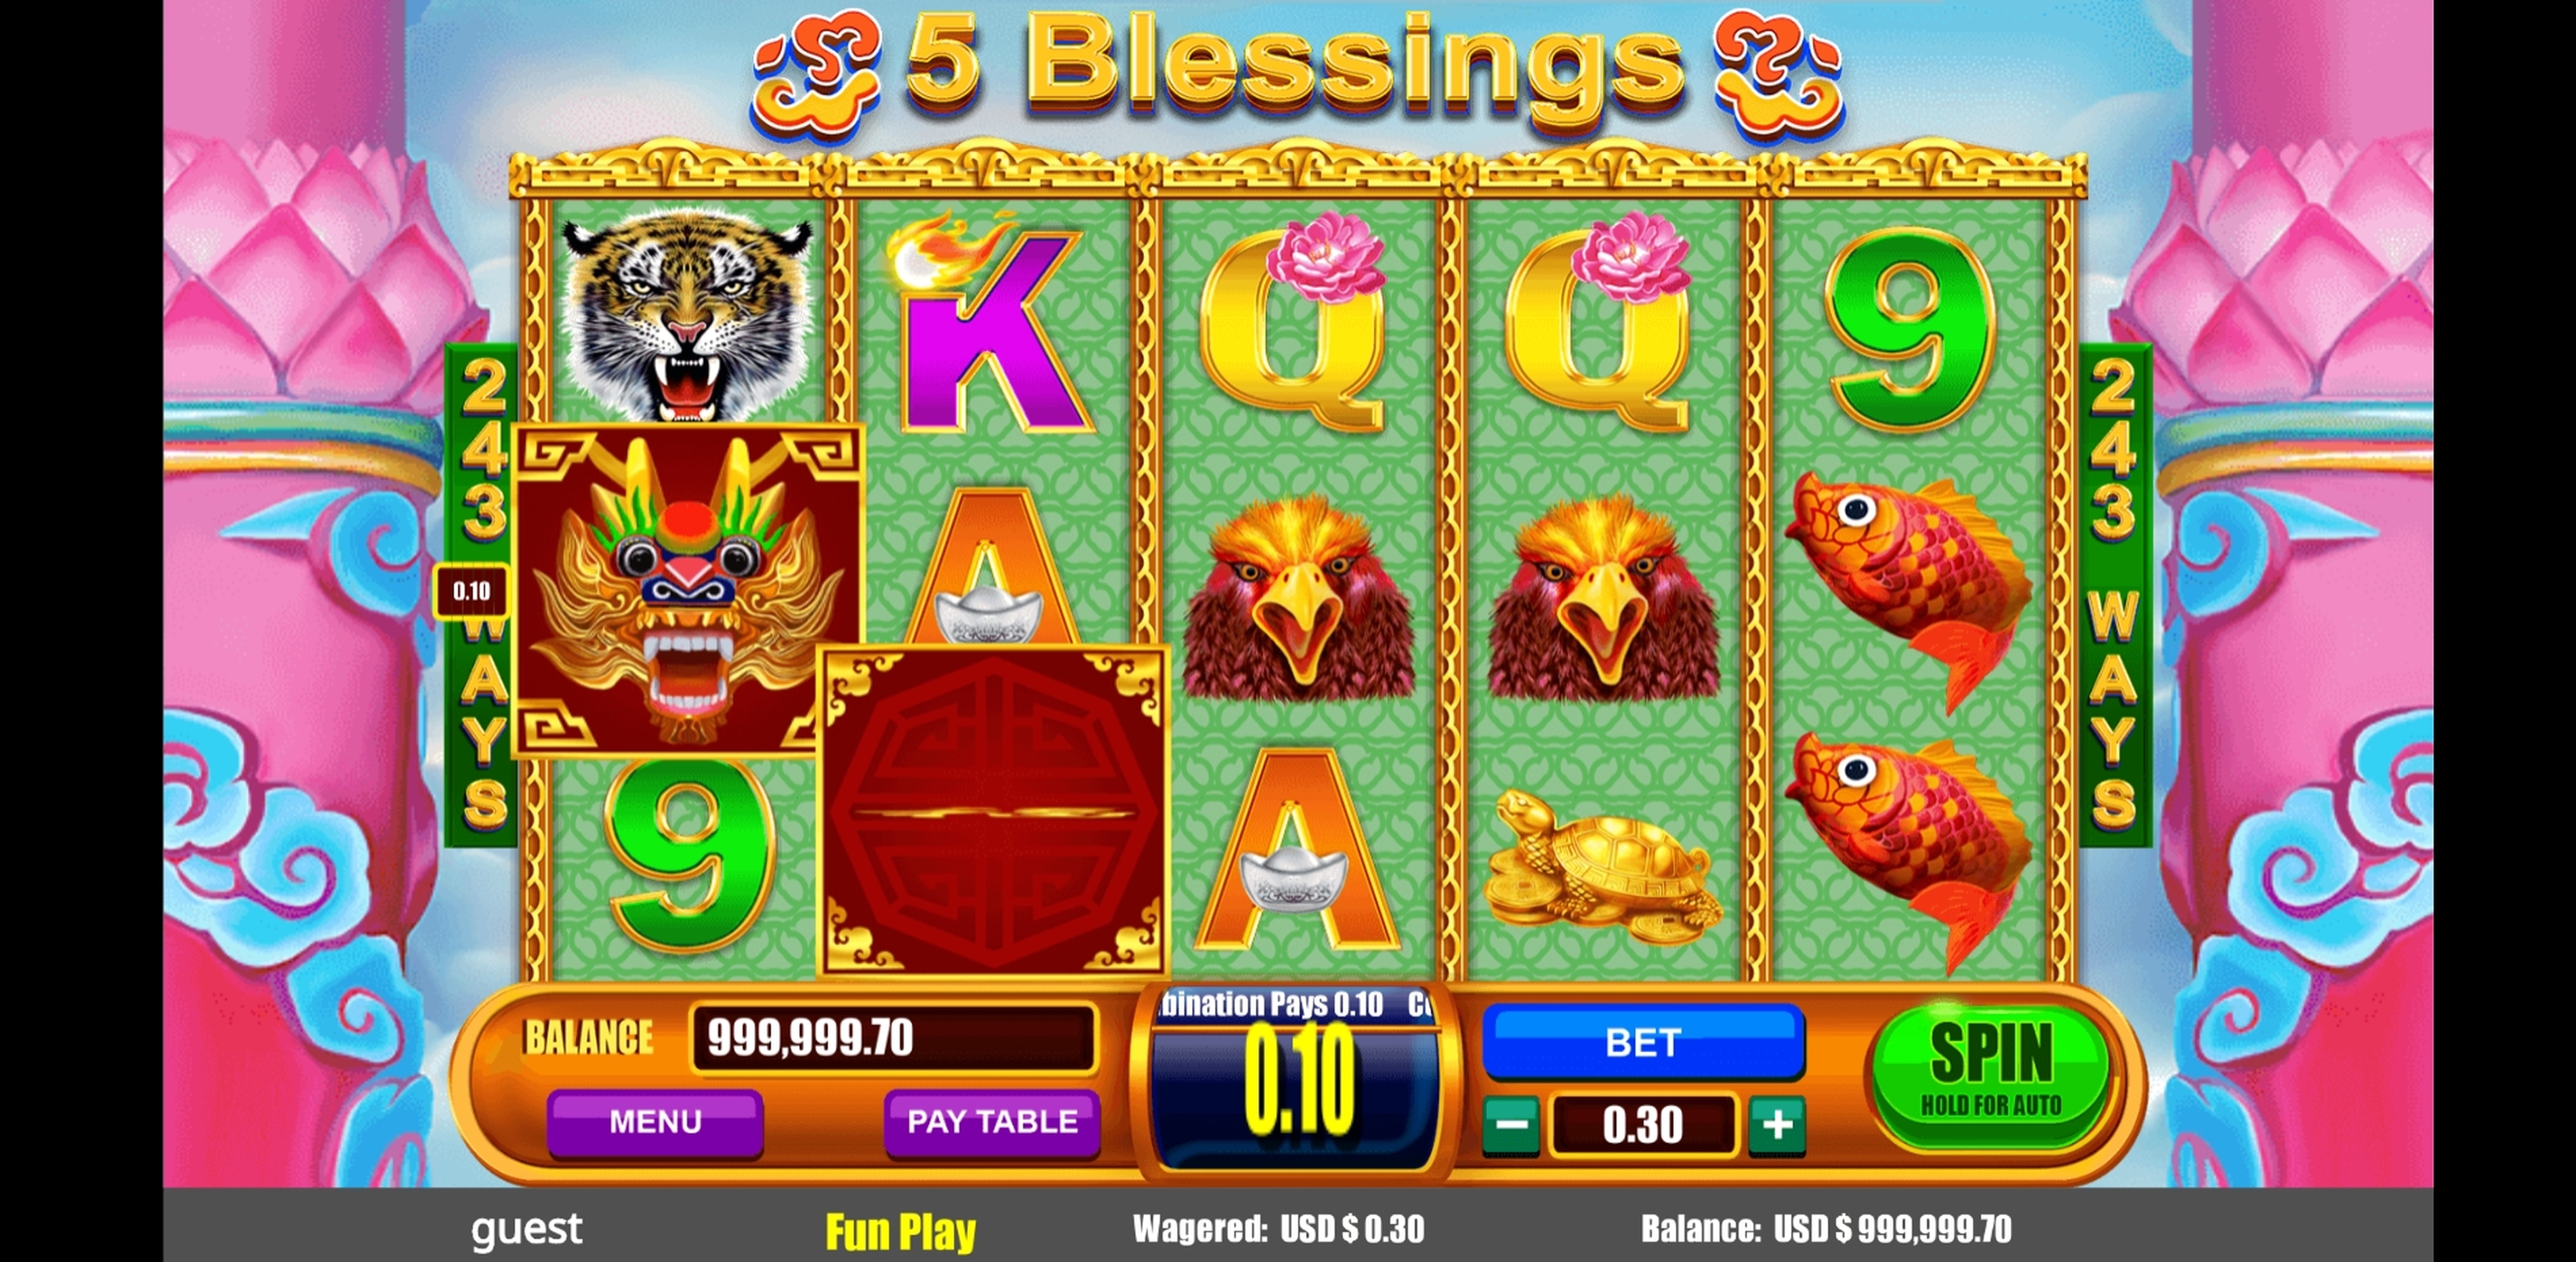 Win Money in 5 Blessings Free Slot Game by August Gaming